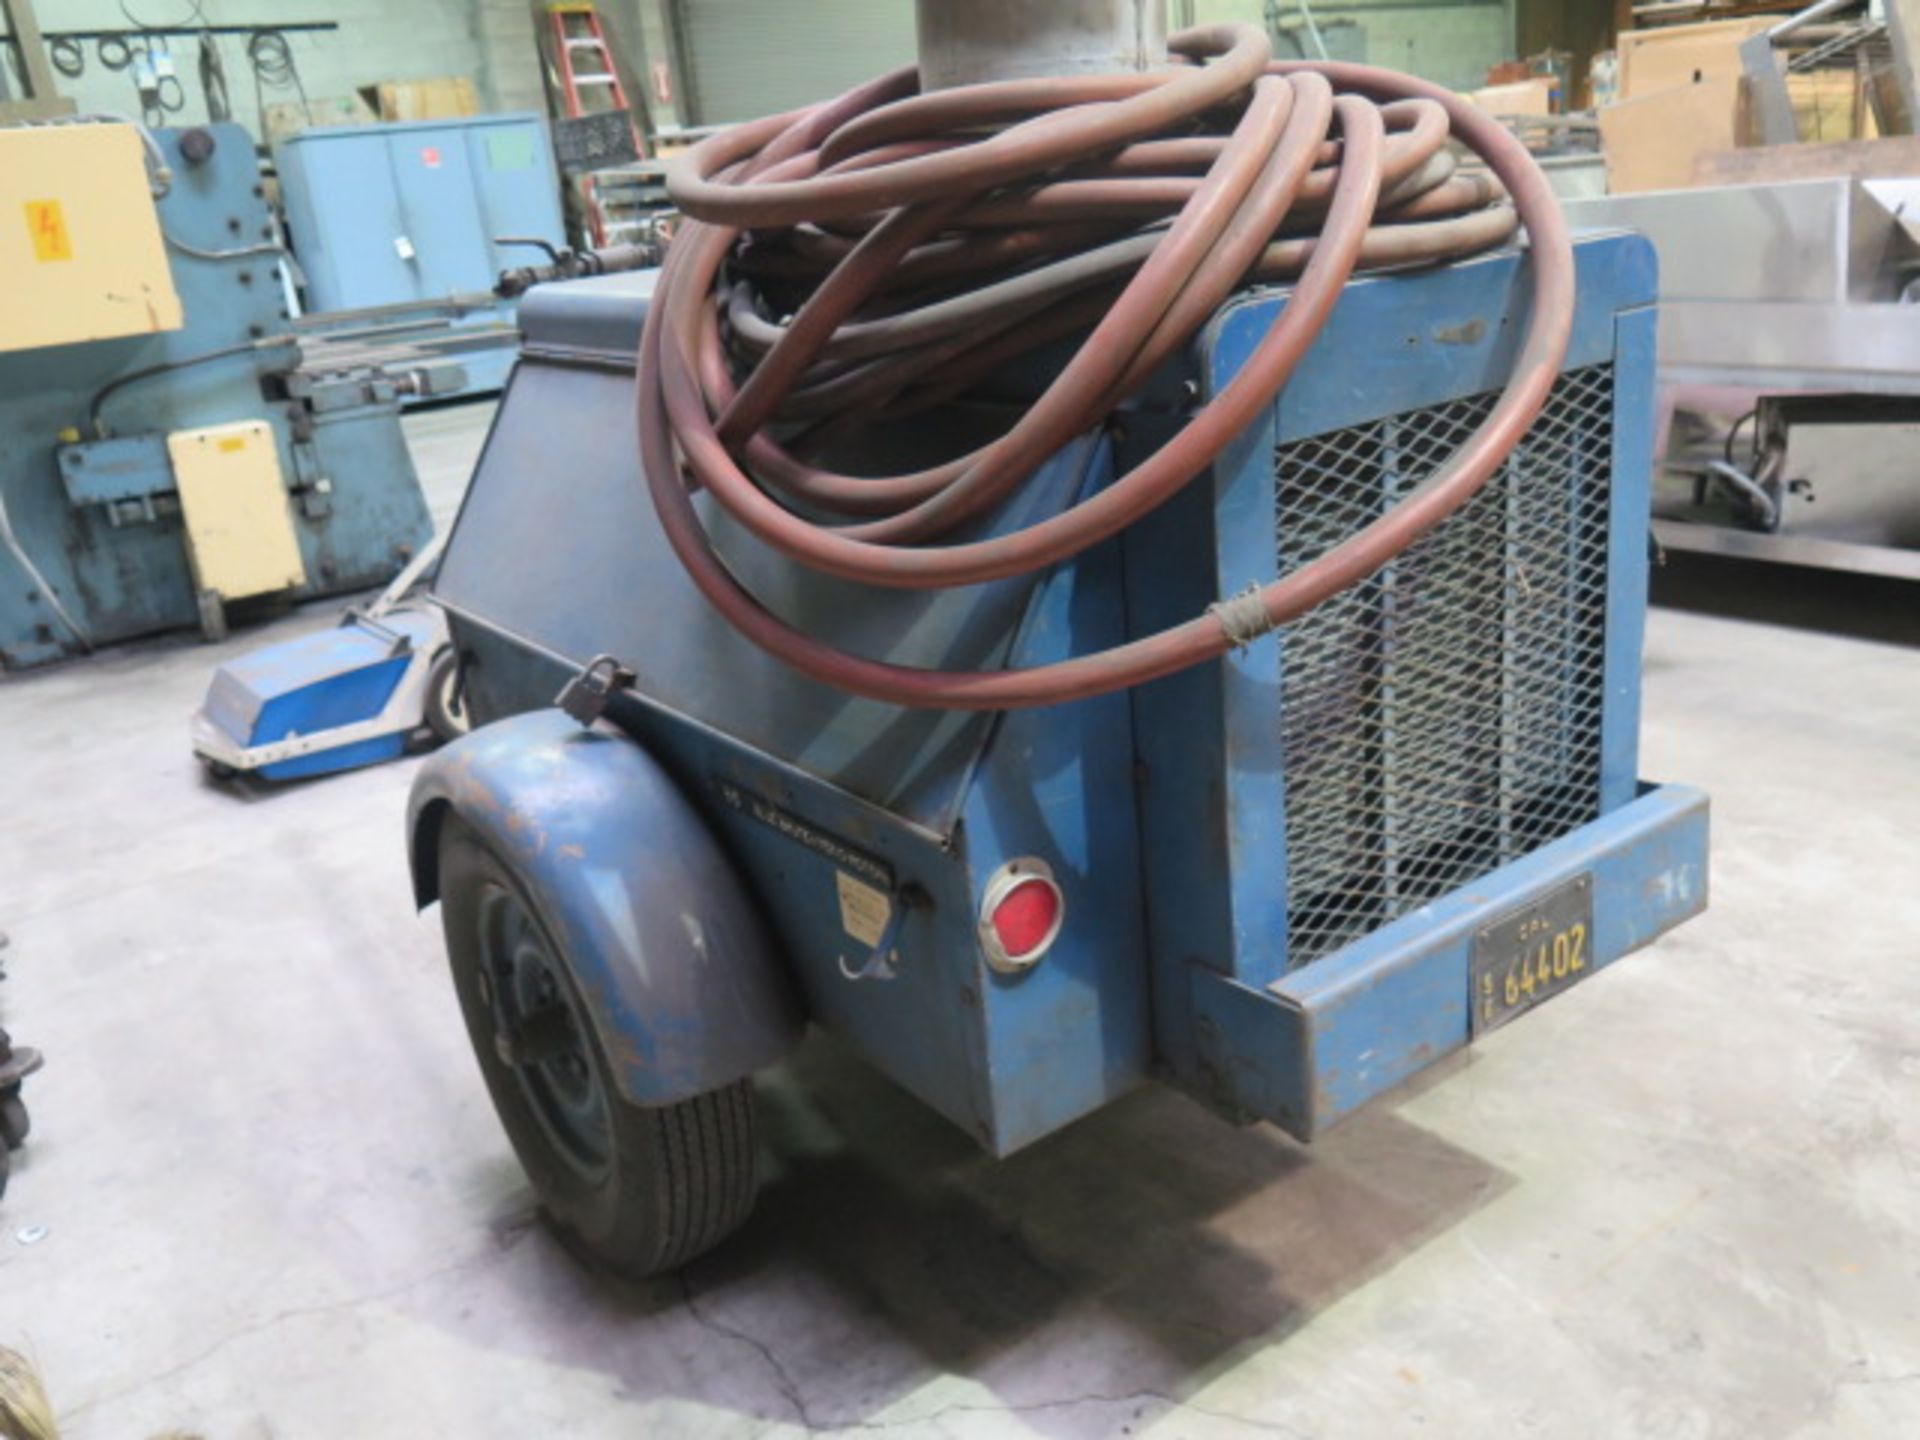 Worthington mdl. 1669 “Blue Brute Mono-Rotor 85” 85 CFM Towable Air Compressor w/ 4-Cylinder Motor - Image 4 of 9